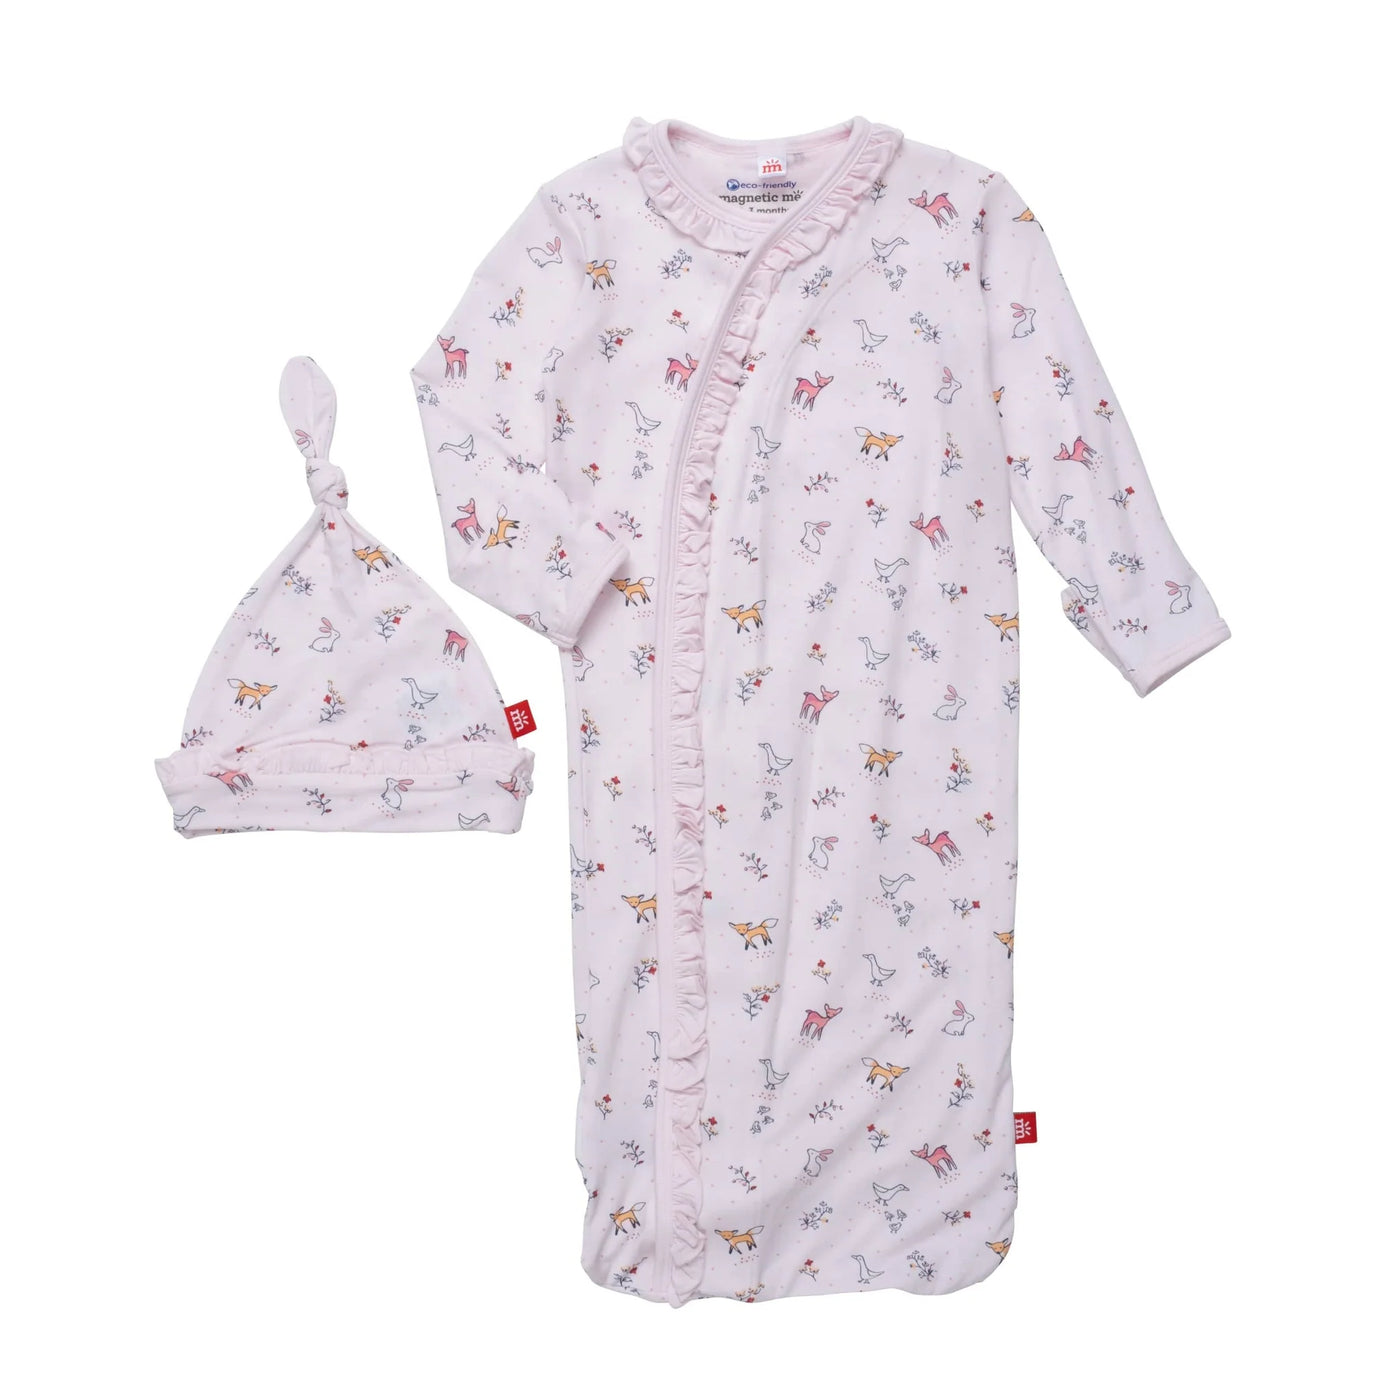 Woodsy Tale Pink Sleeper Gown + Hat Set